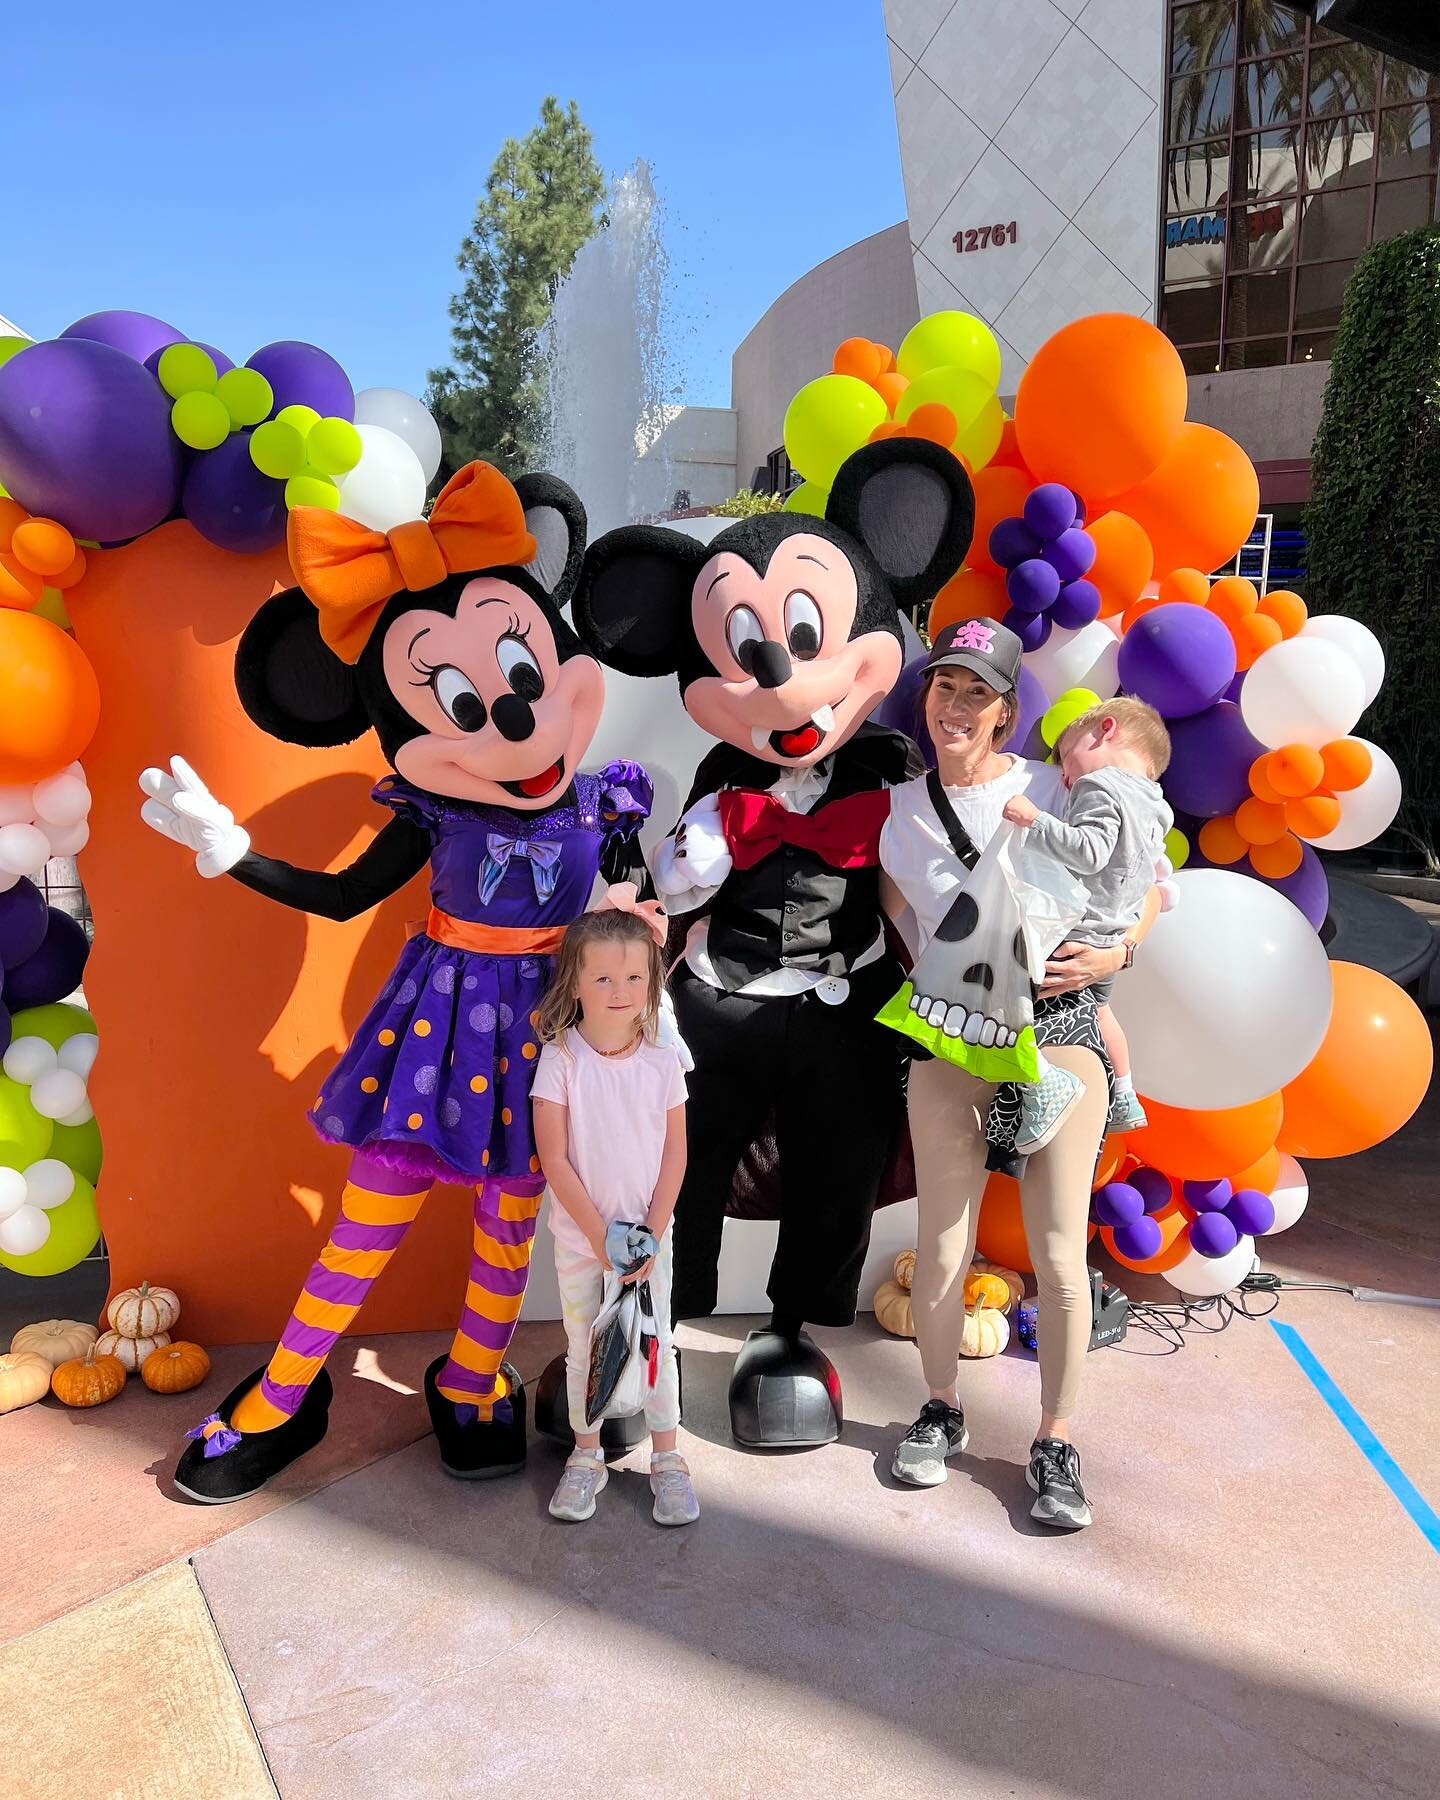 Happy Halloween 🎃 from me &amp; my little pumpkins&hellip; with a little help from Minnie &amp; Mickey. Balloons &amp; backdrop by us @fotovibeparty 🎃💀🕷️
.
.
.
.
#halloween #minniemouse #mickeymouse #balloongarland #balloondecor #orangecounty #no